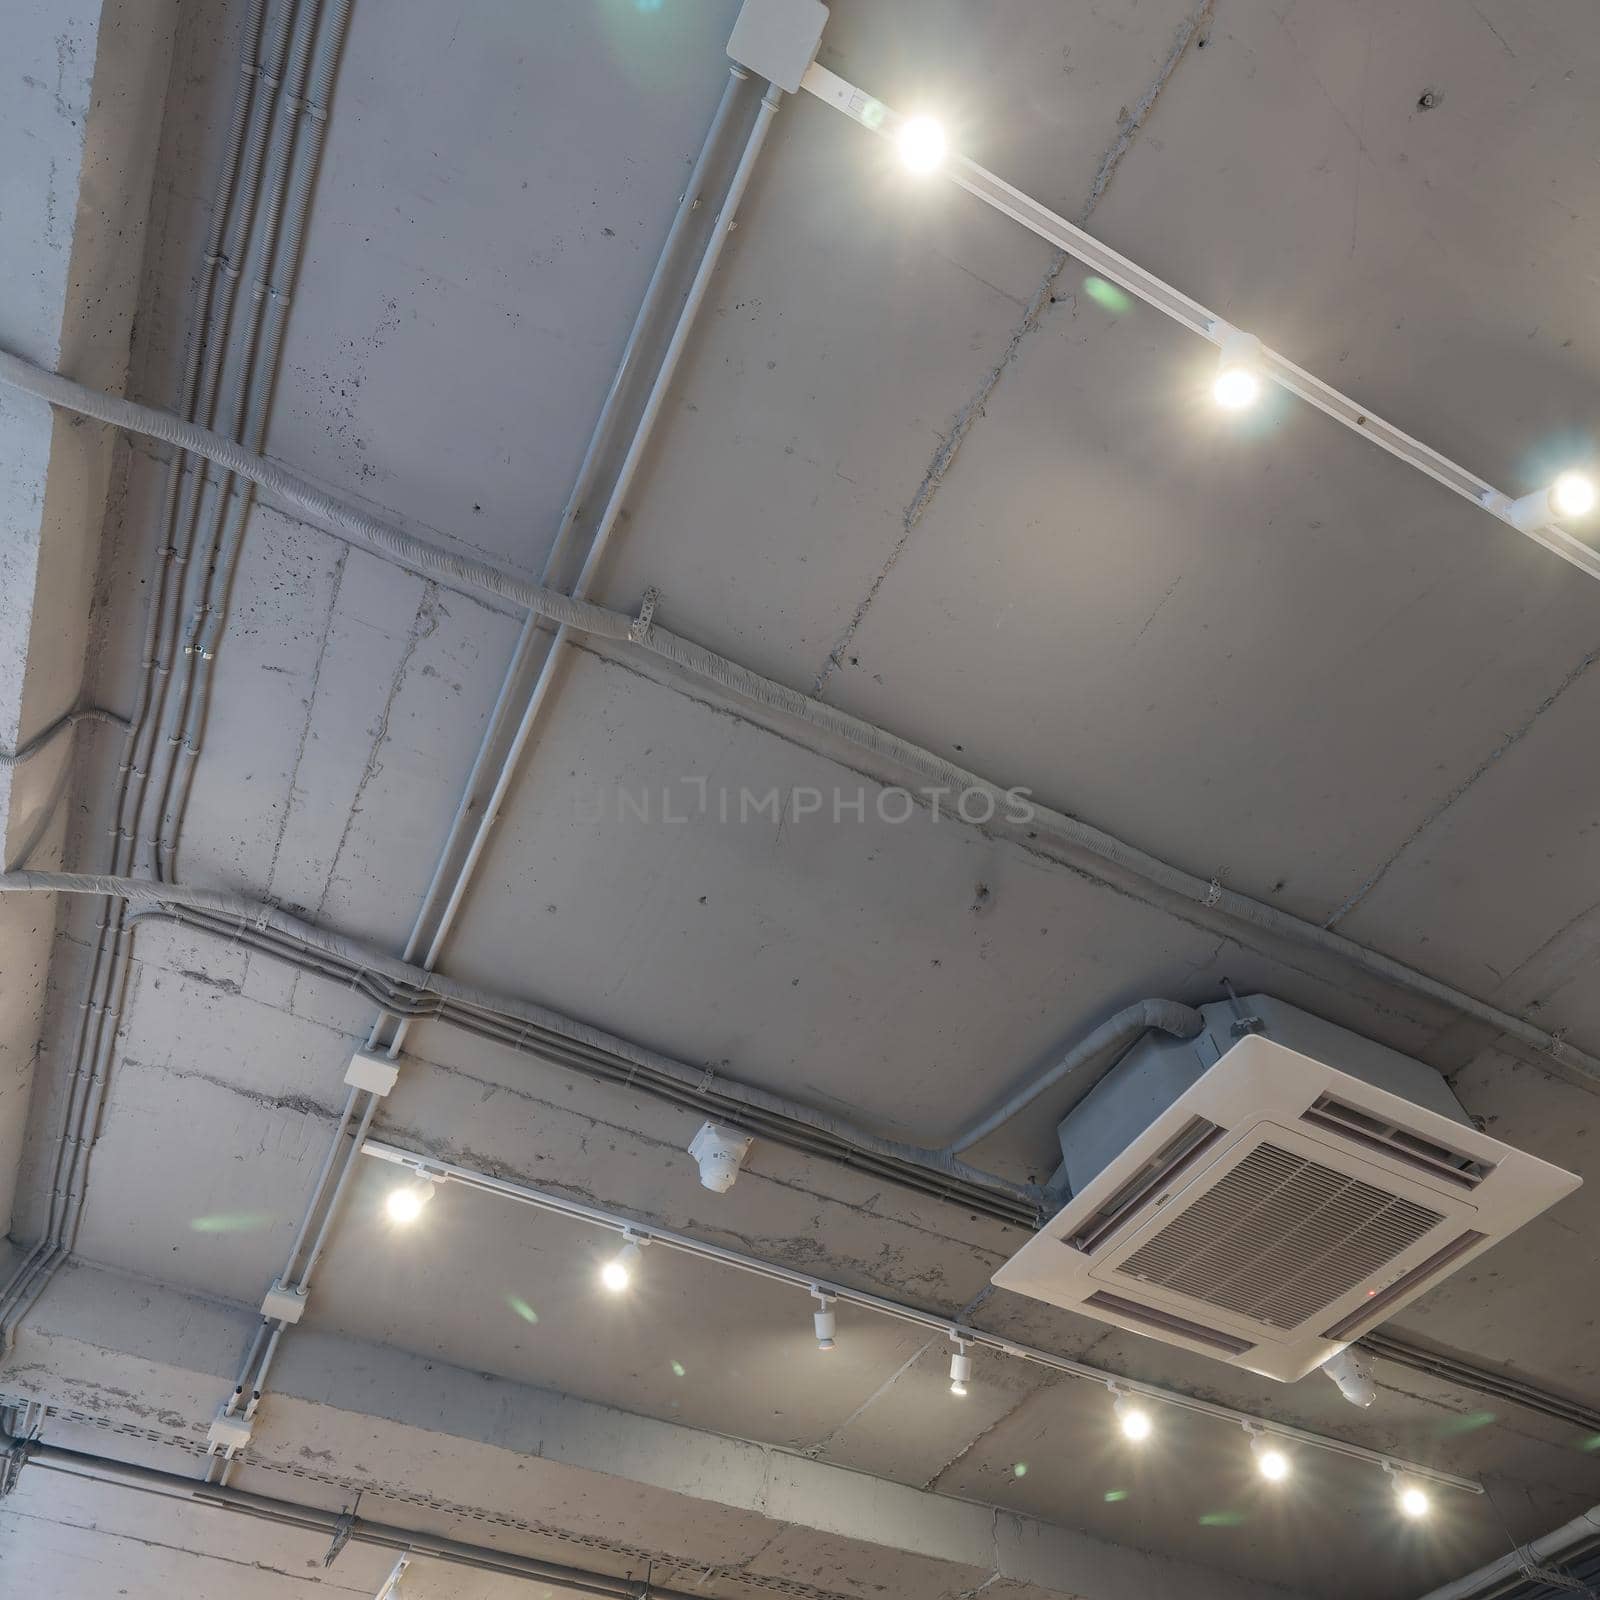 Abstract loft interior of concrete grey ceiling with air ventilation and security camera. Interior architecture and ceiling design of industrial loft building decorated with modern lamps by panophotograph